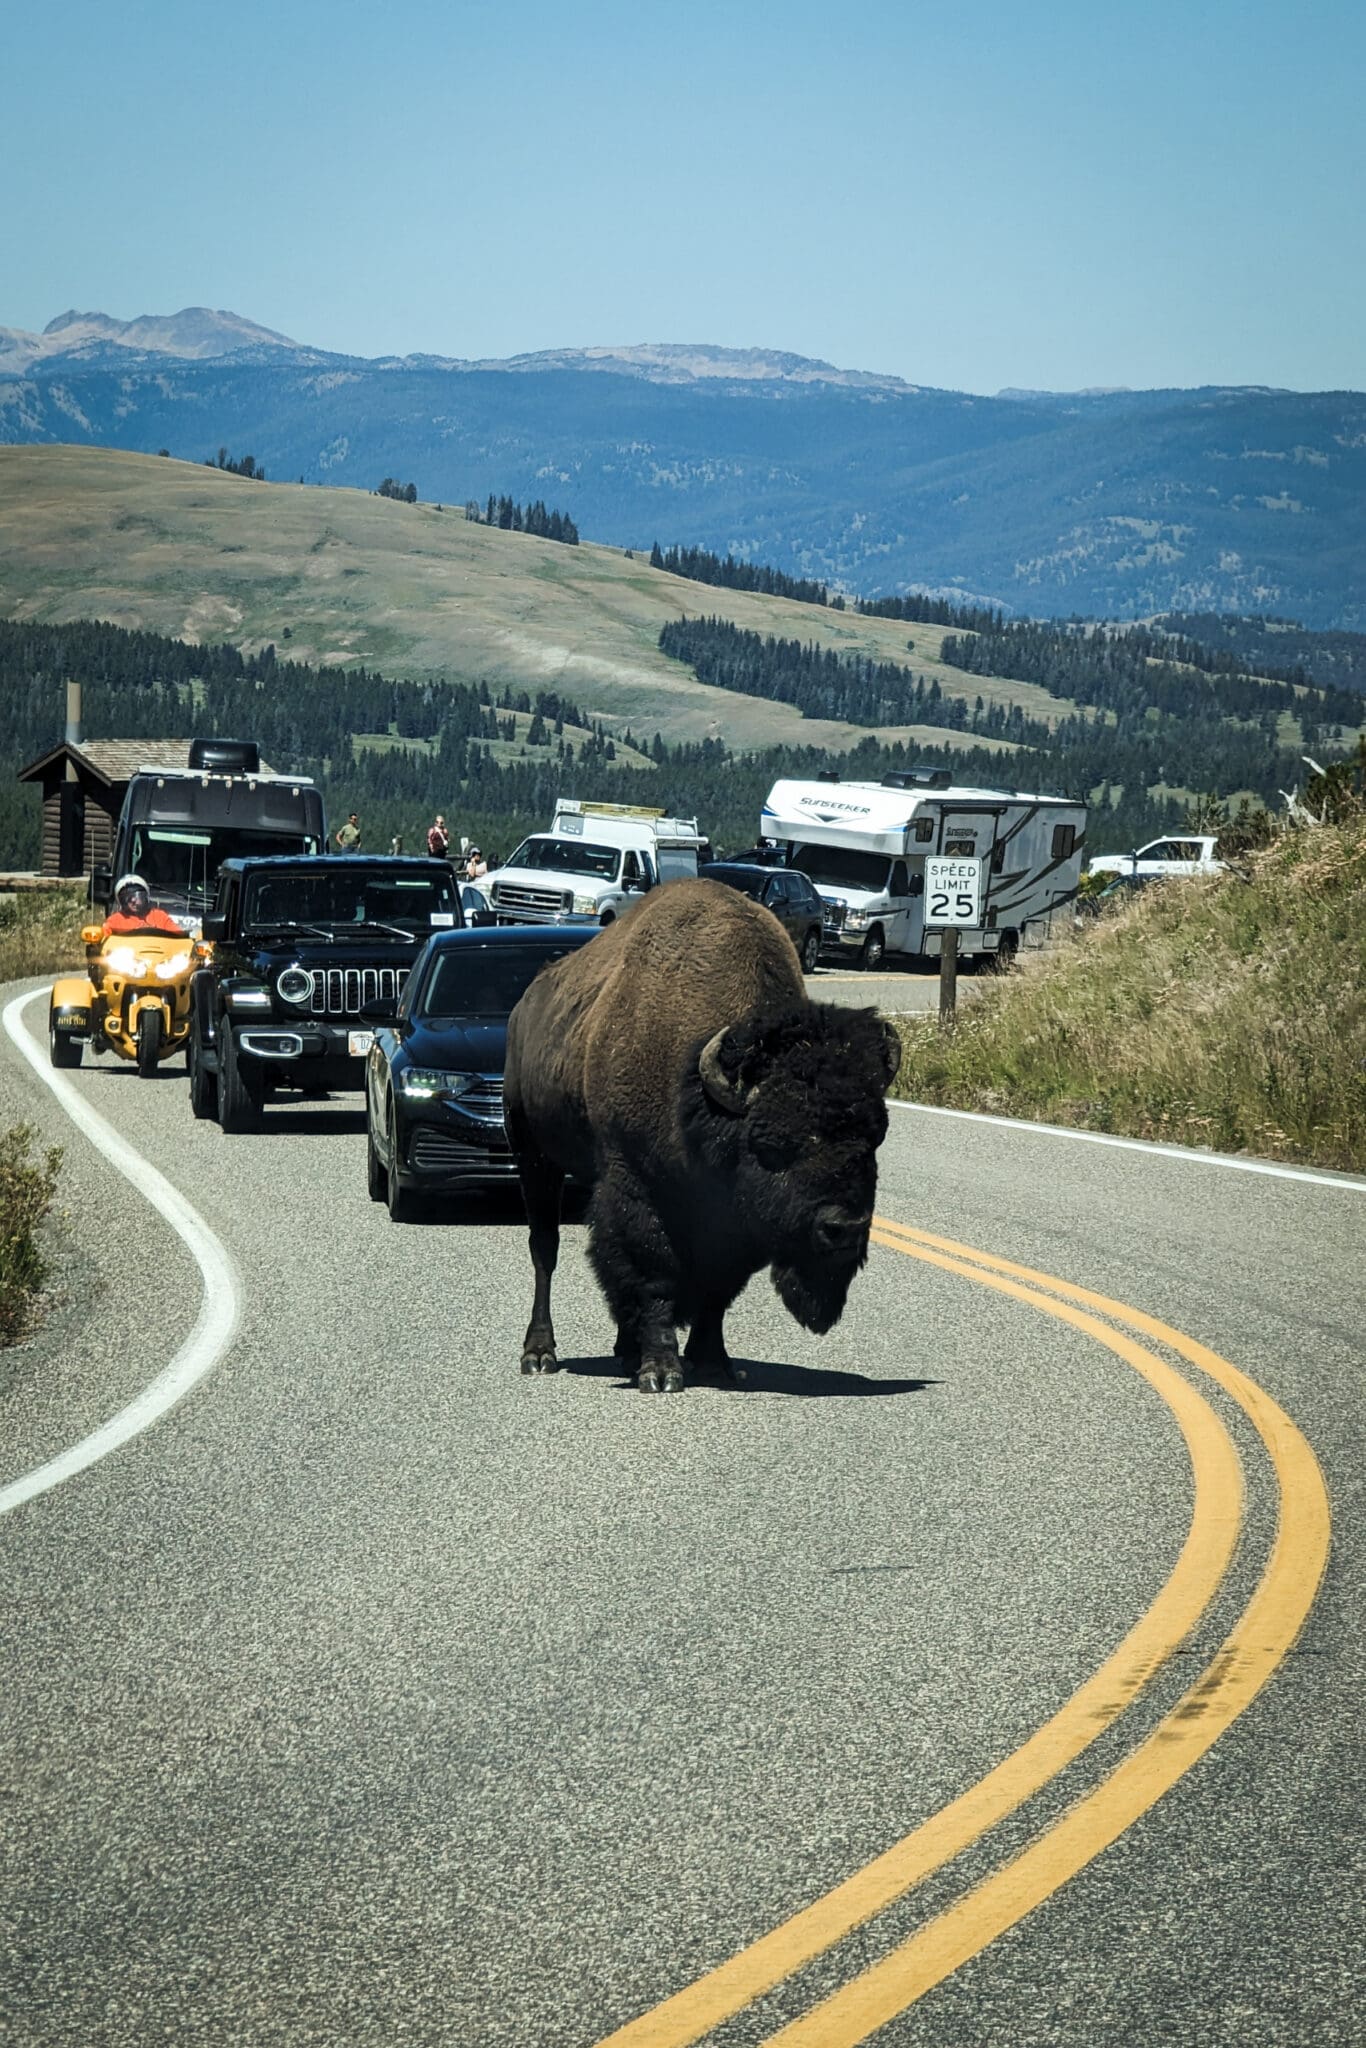 Bison in the street in Yellowstone National Park